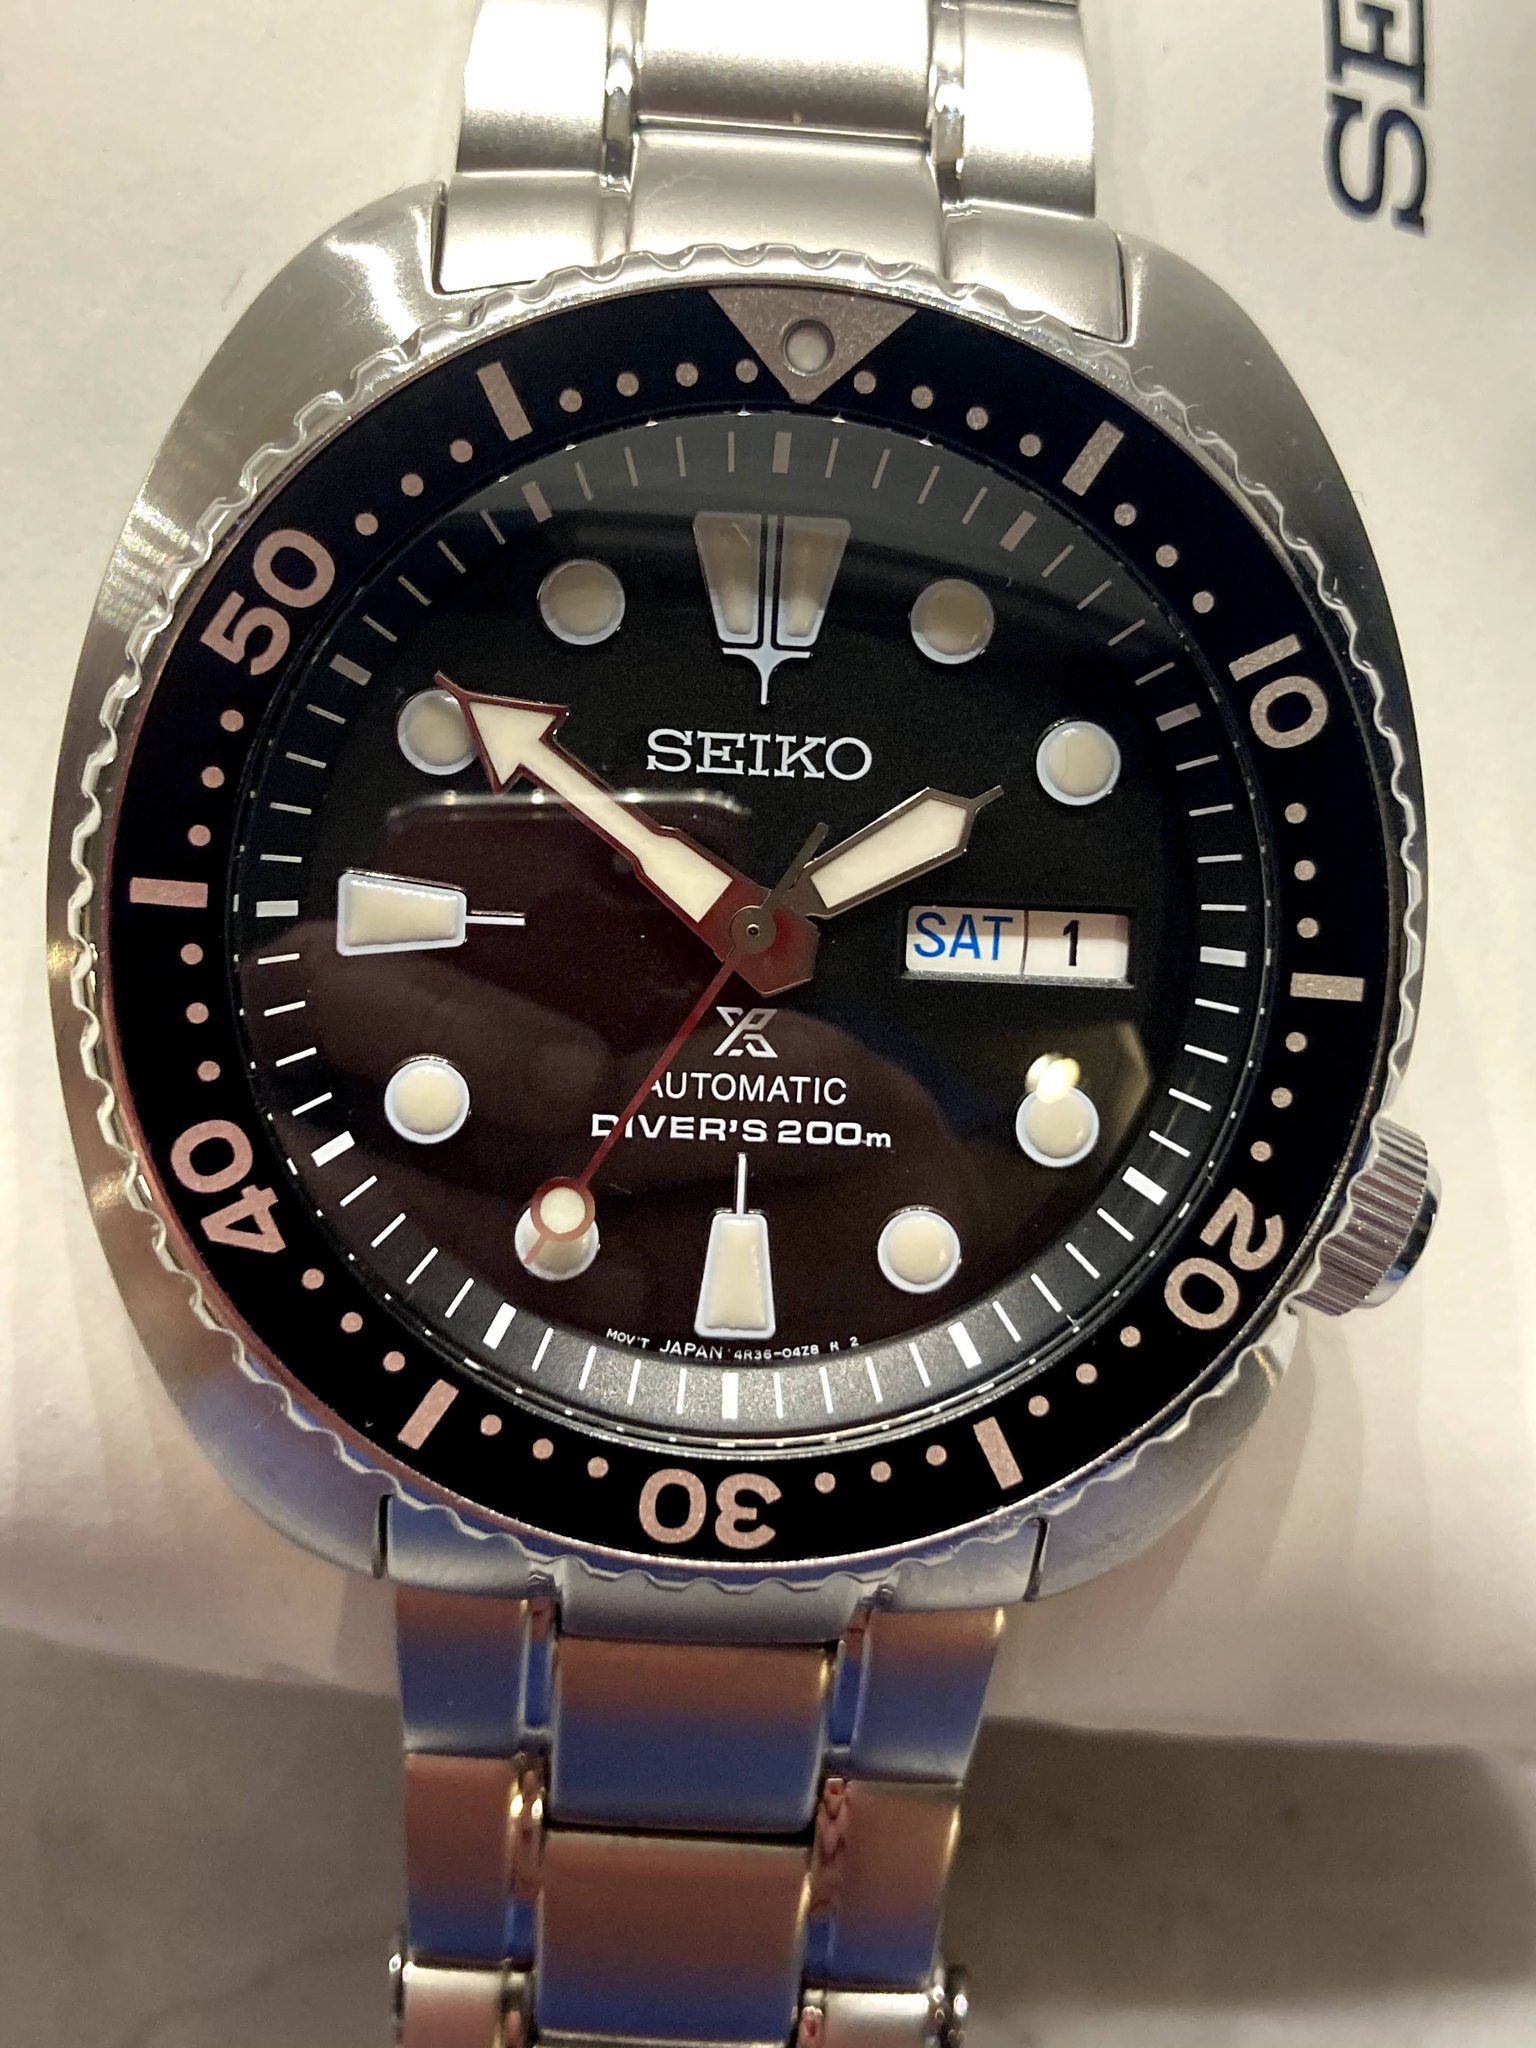 SOLD: Seiko SRP777 Turtle Diver (4R36-04Y0) - $245 OBO | The Watch Site